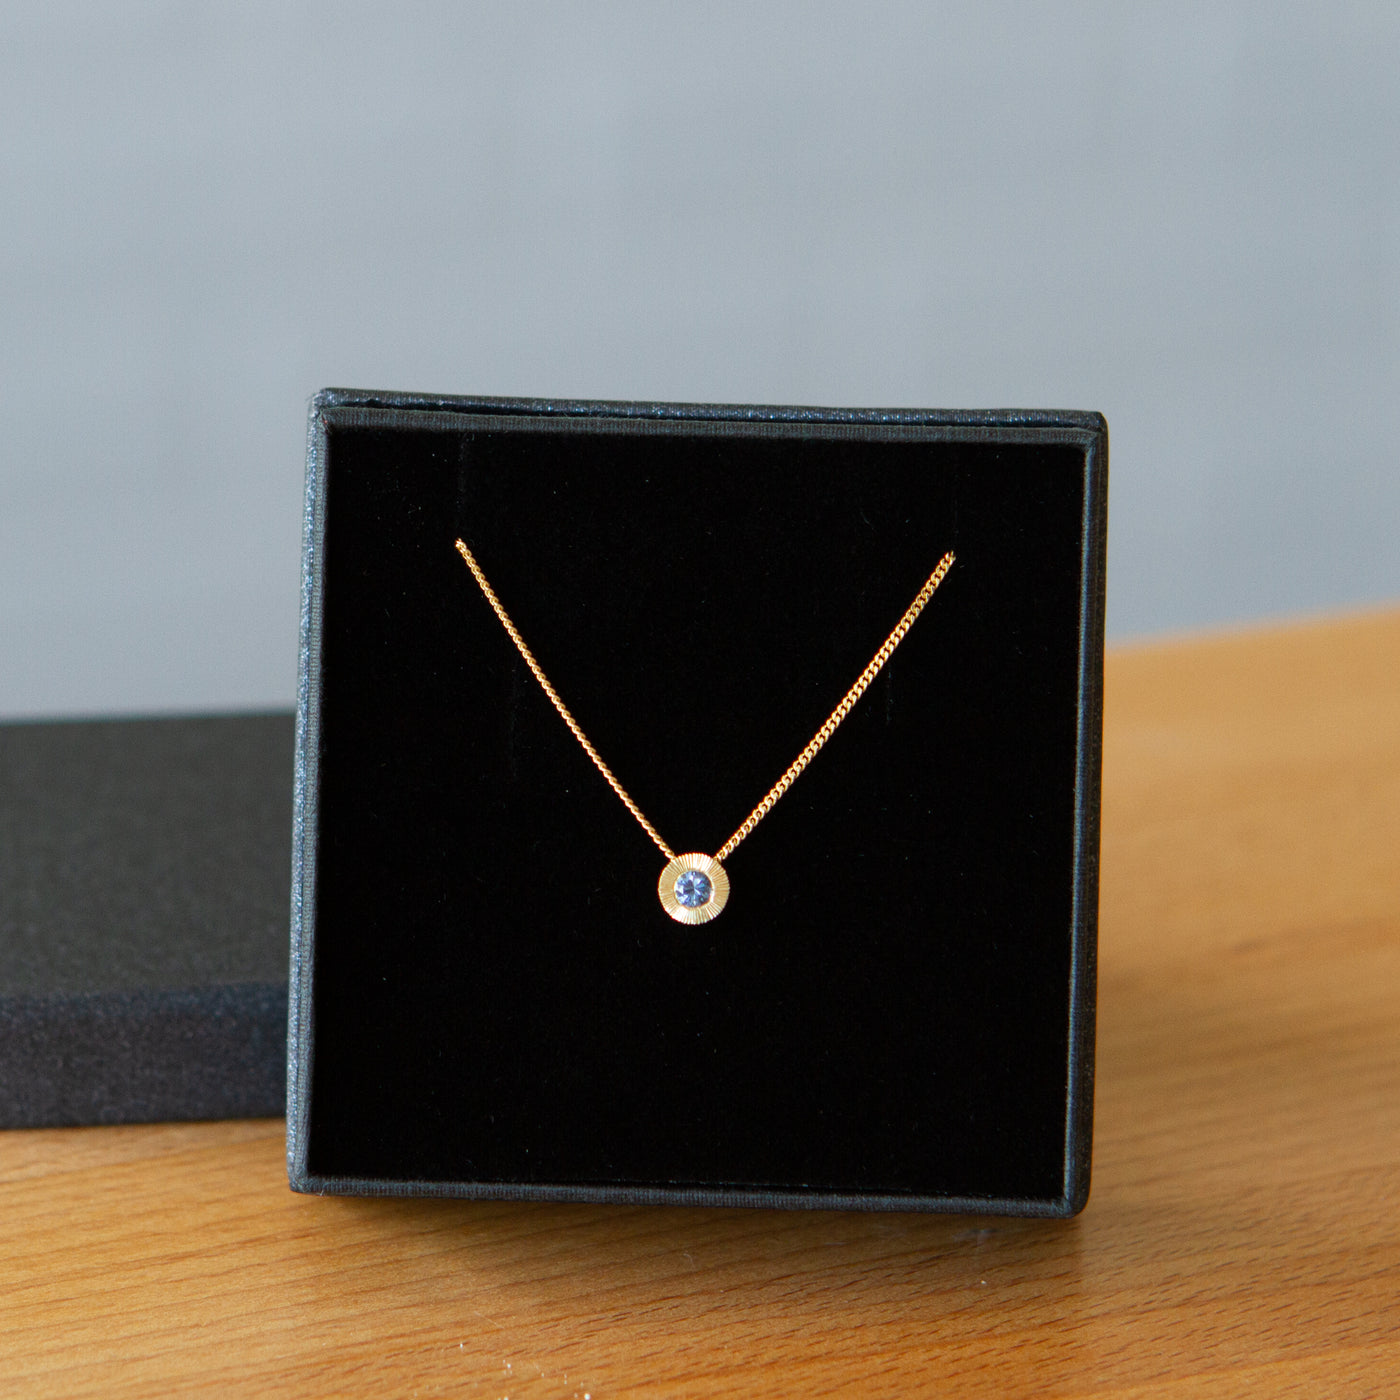 14k yellow gold small aurora necklace with a blue montana sapphire center in a gift box